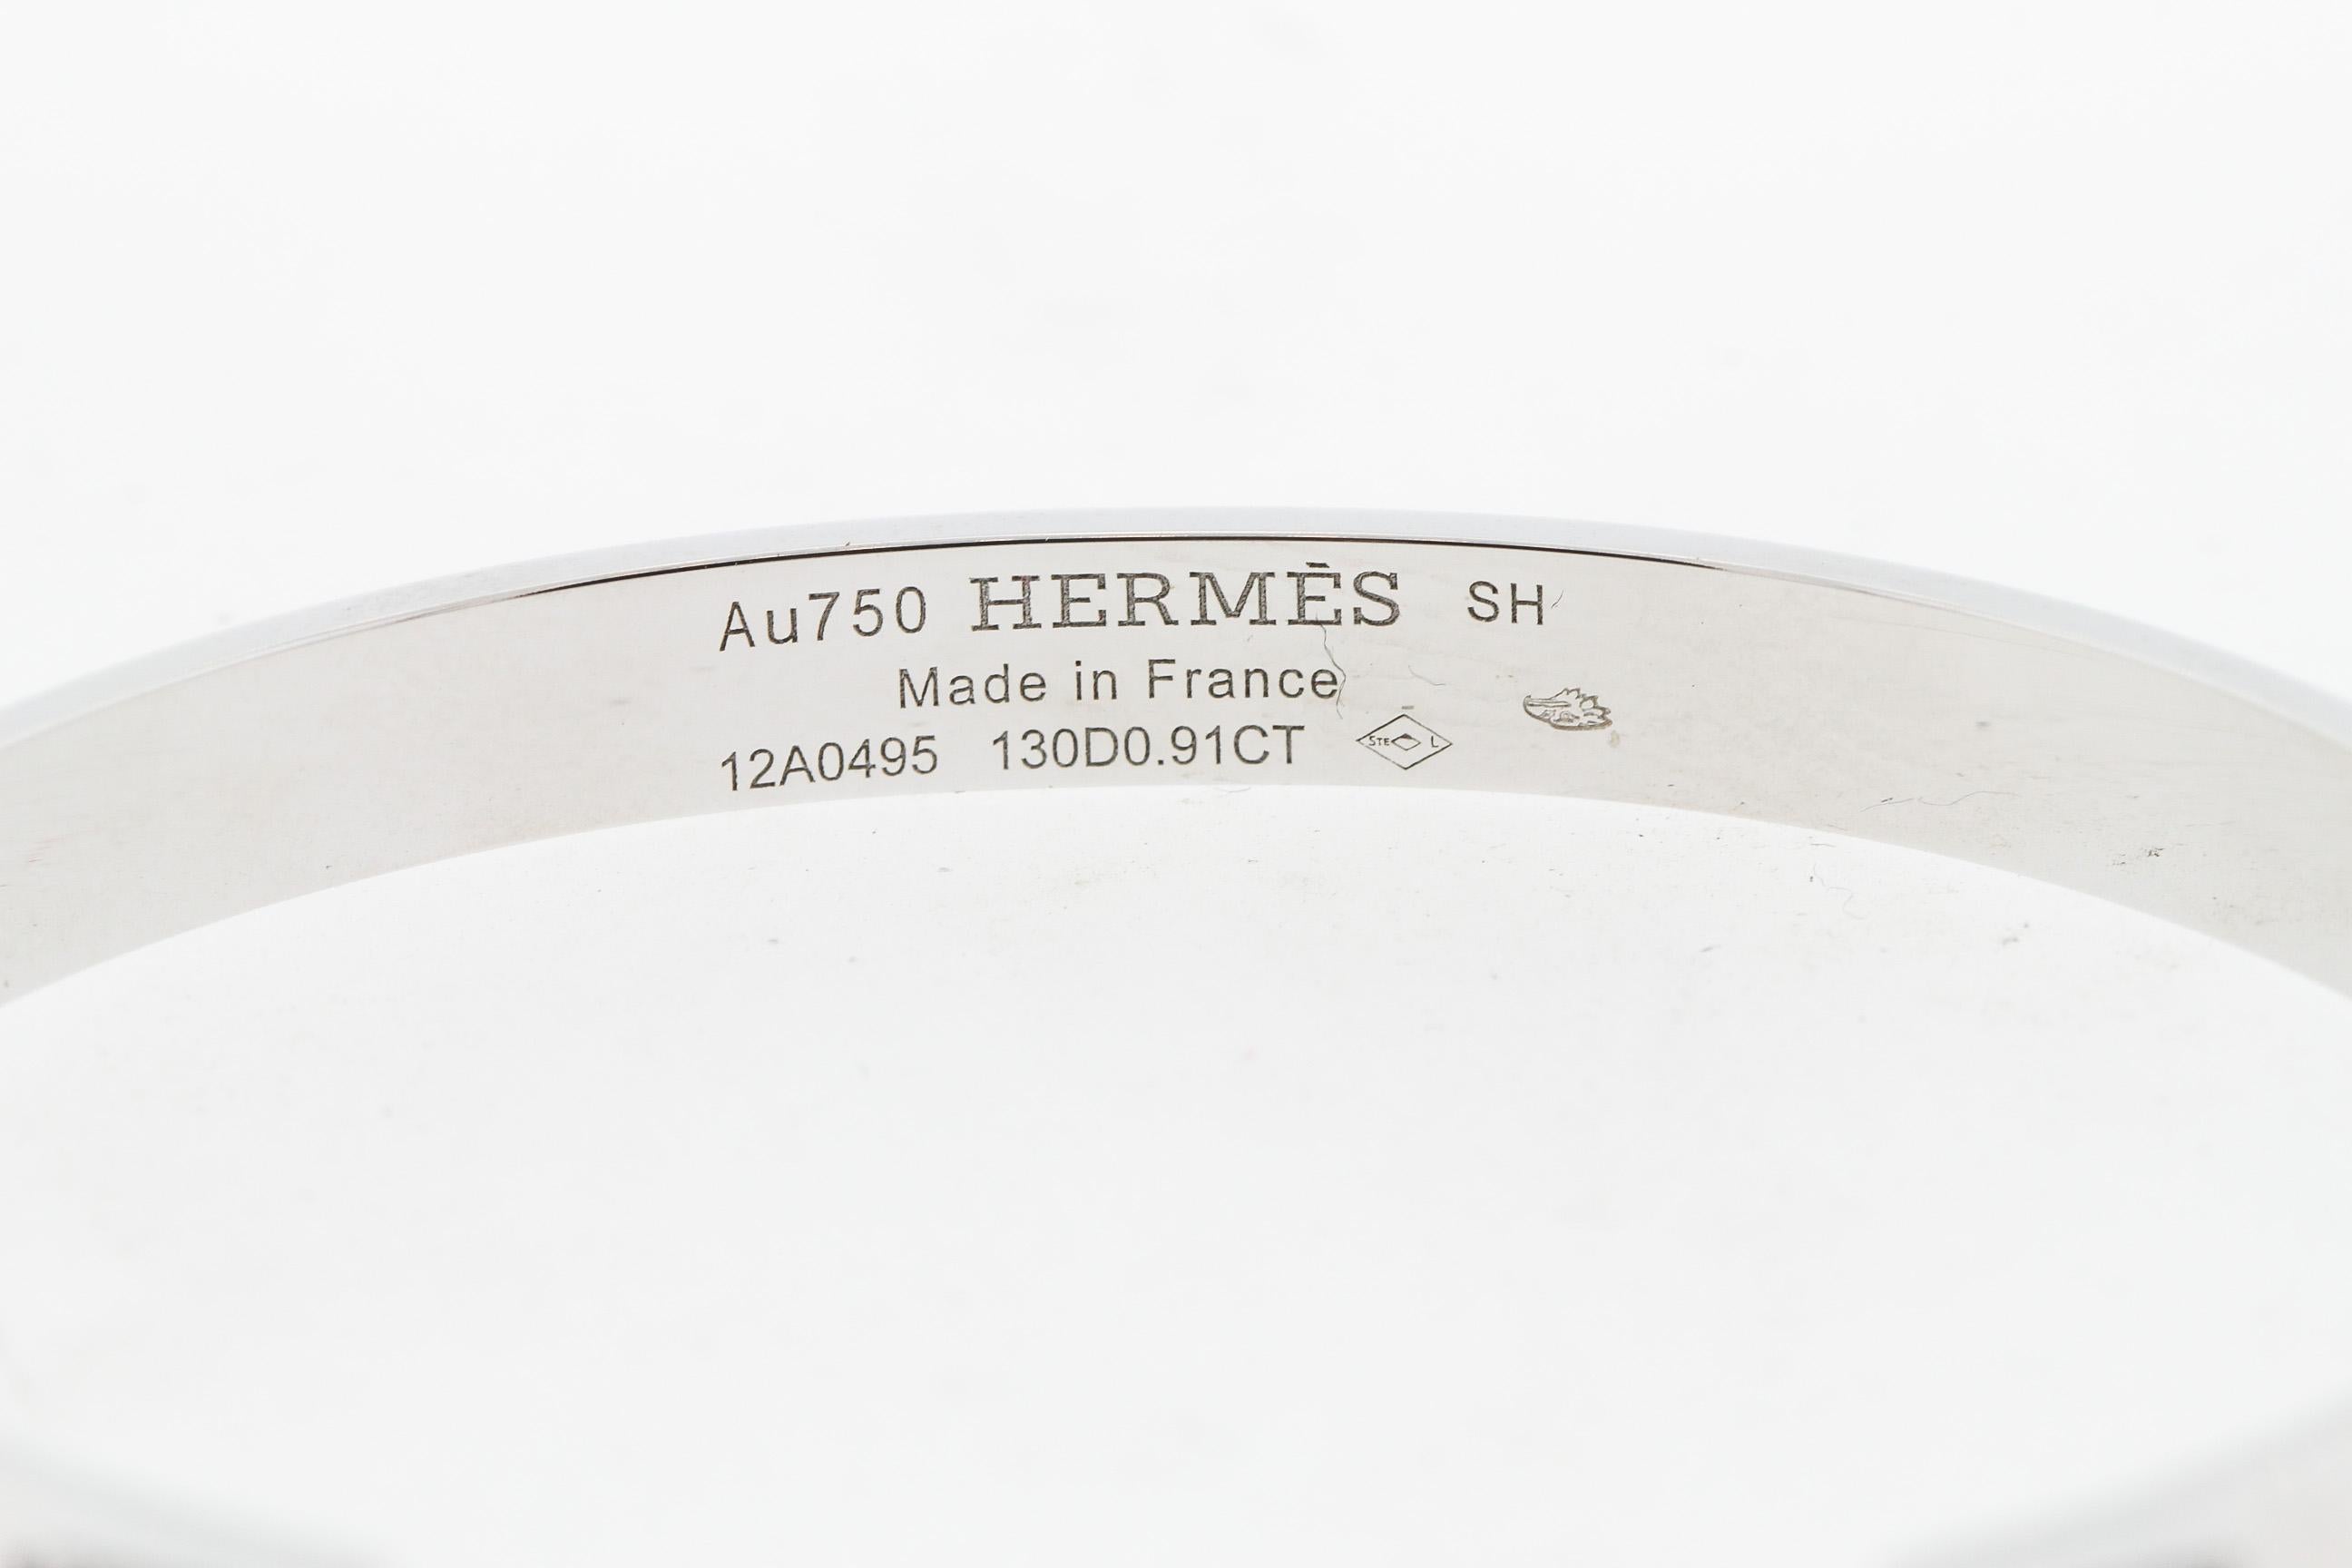 Classic modern white gold diamond bangle by Hermes from the Collier de Chien collection. This is the small size bangle with 130 stones weighing 0.91 carats. The retail for this bangle at Hermes is $21,400. The bangle hinges open. It’s design is